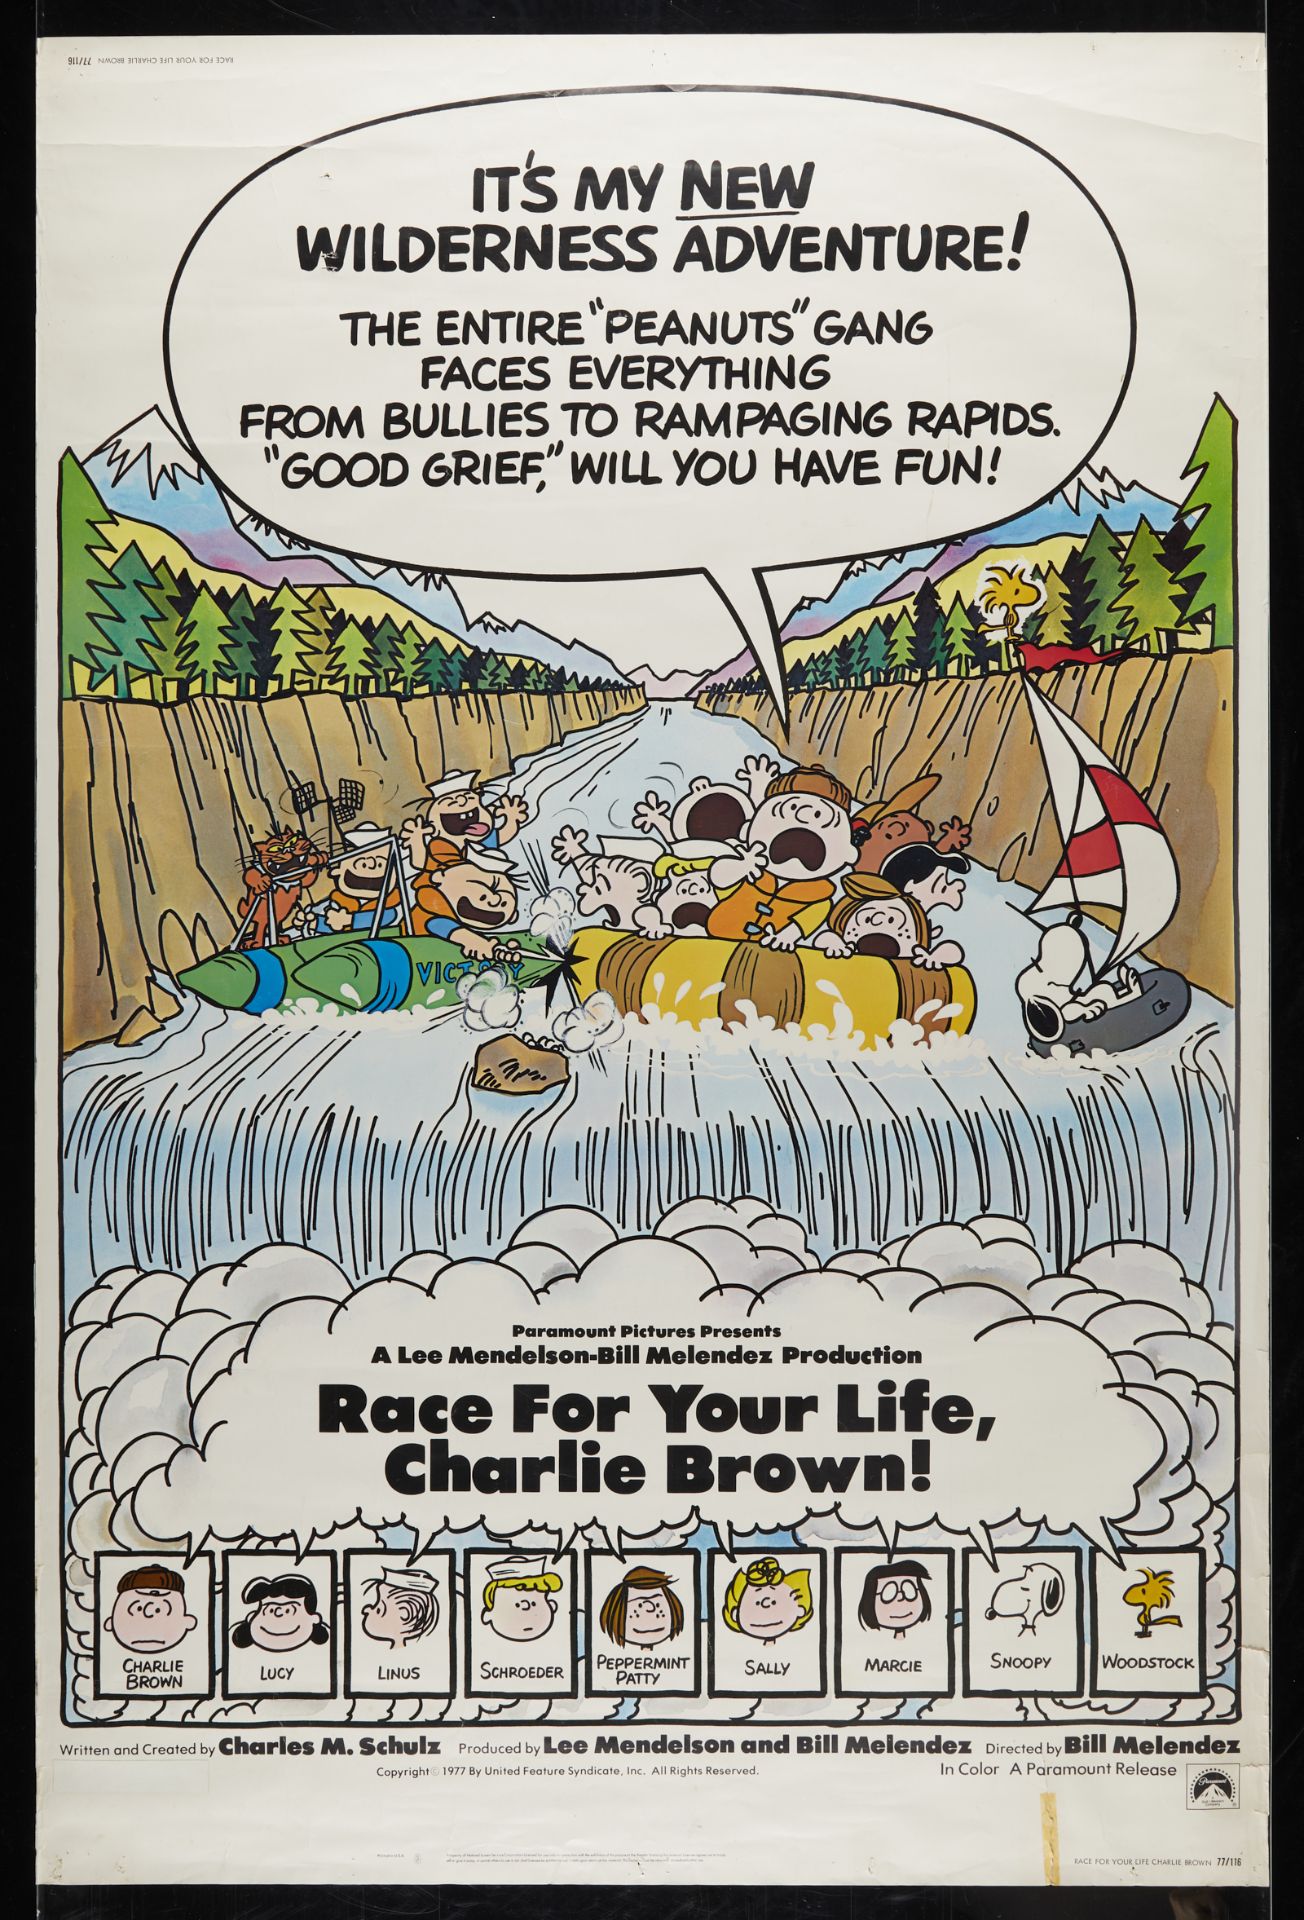 "Race for Your Life, Charlie Brown!" Movie Poster - Image 2 of 2